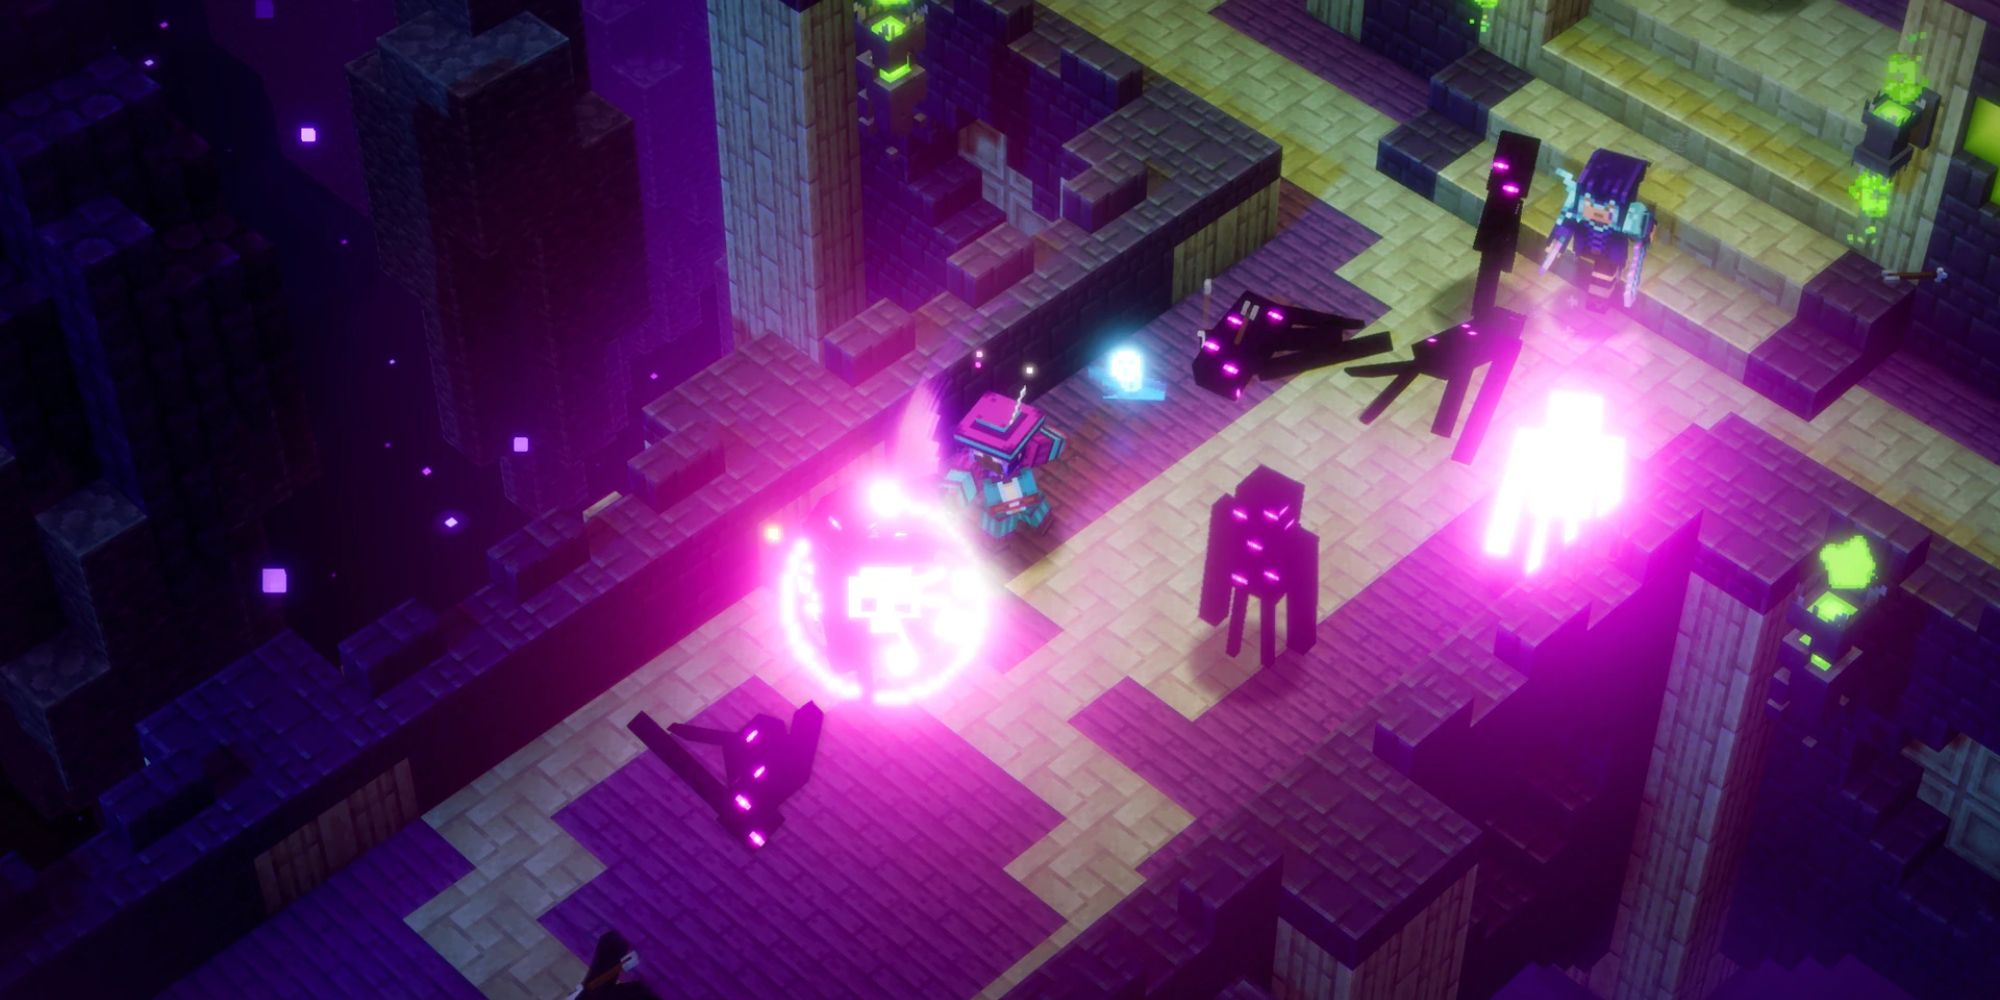 An image from Minecraft Dungeon Echoing Void DLC, showing two players using purple void abilities to fight endermen in the End City.